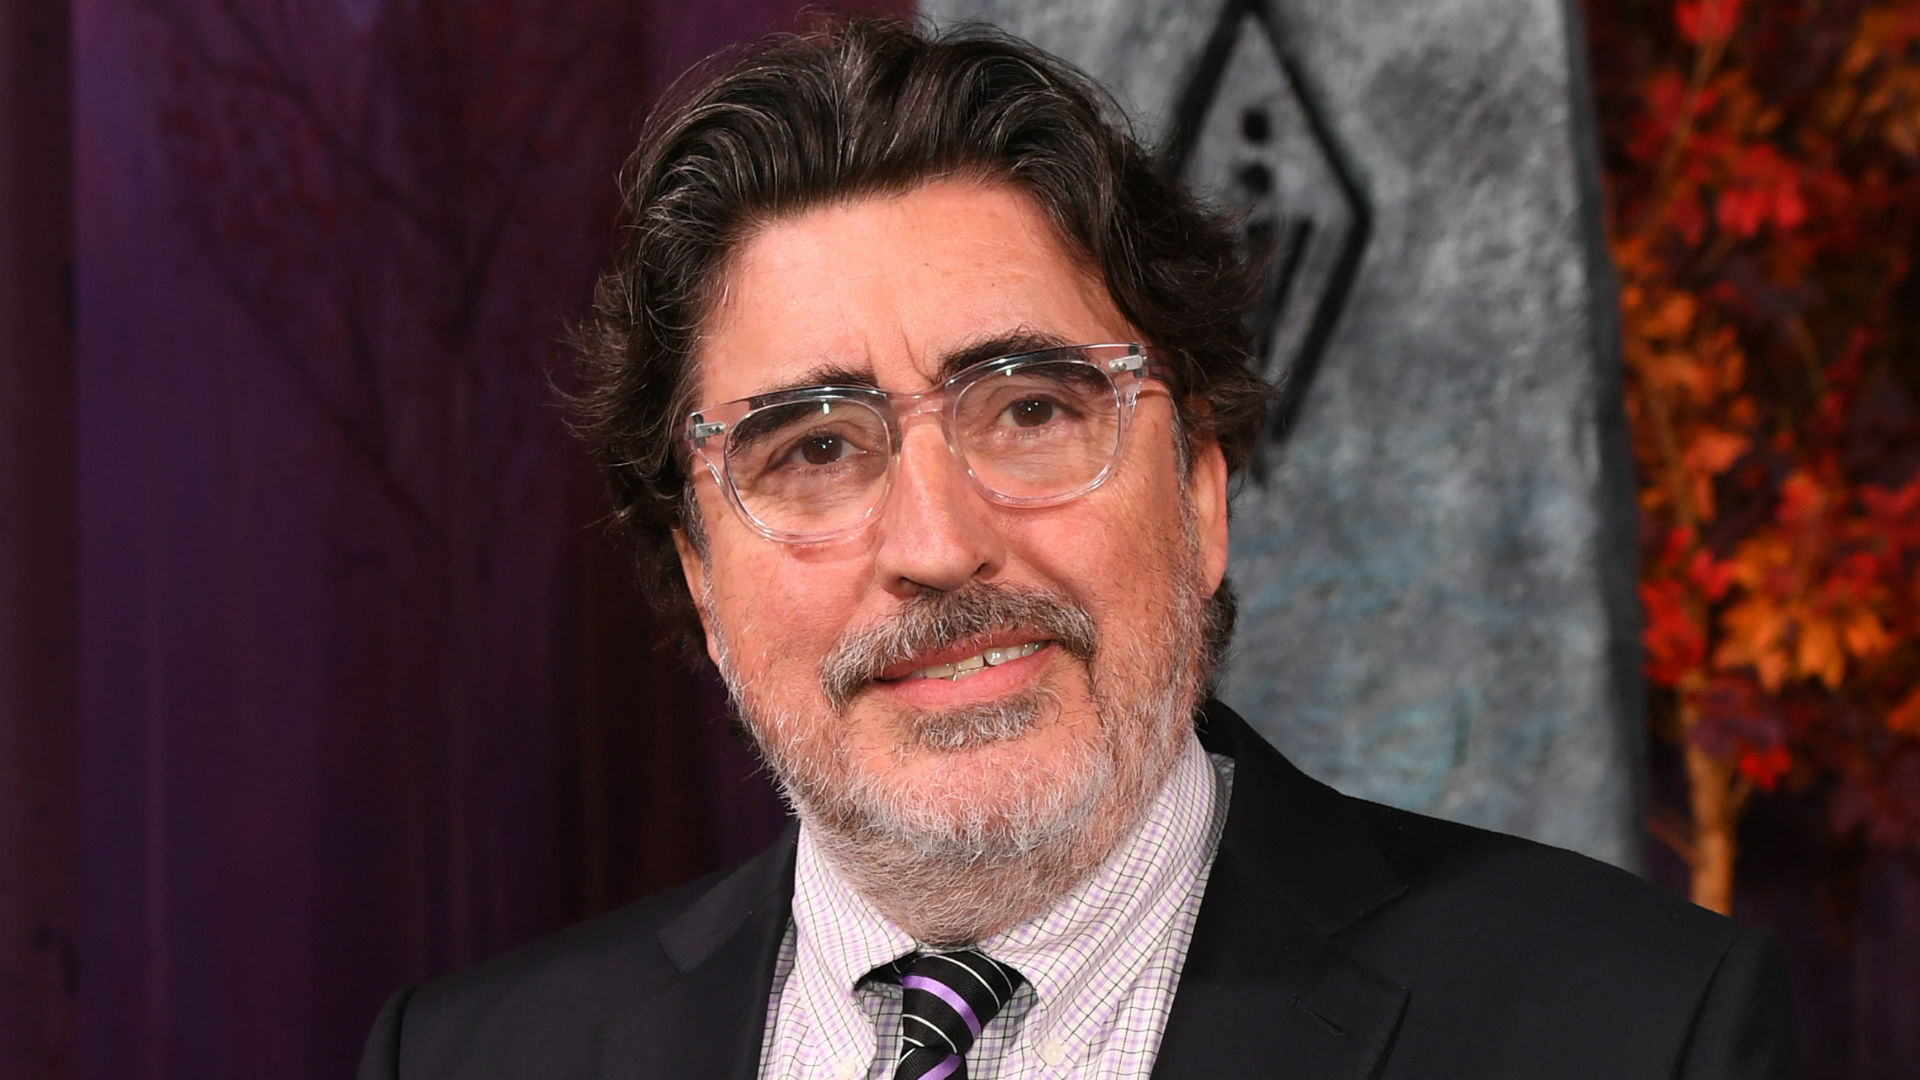 Casting News: Alfred Molina to Reprise Doctor Octopus Role in New 'Spider-Man' Movie